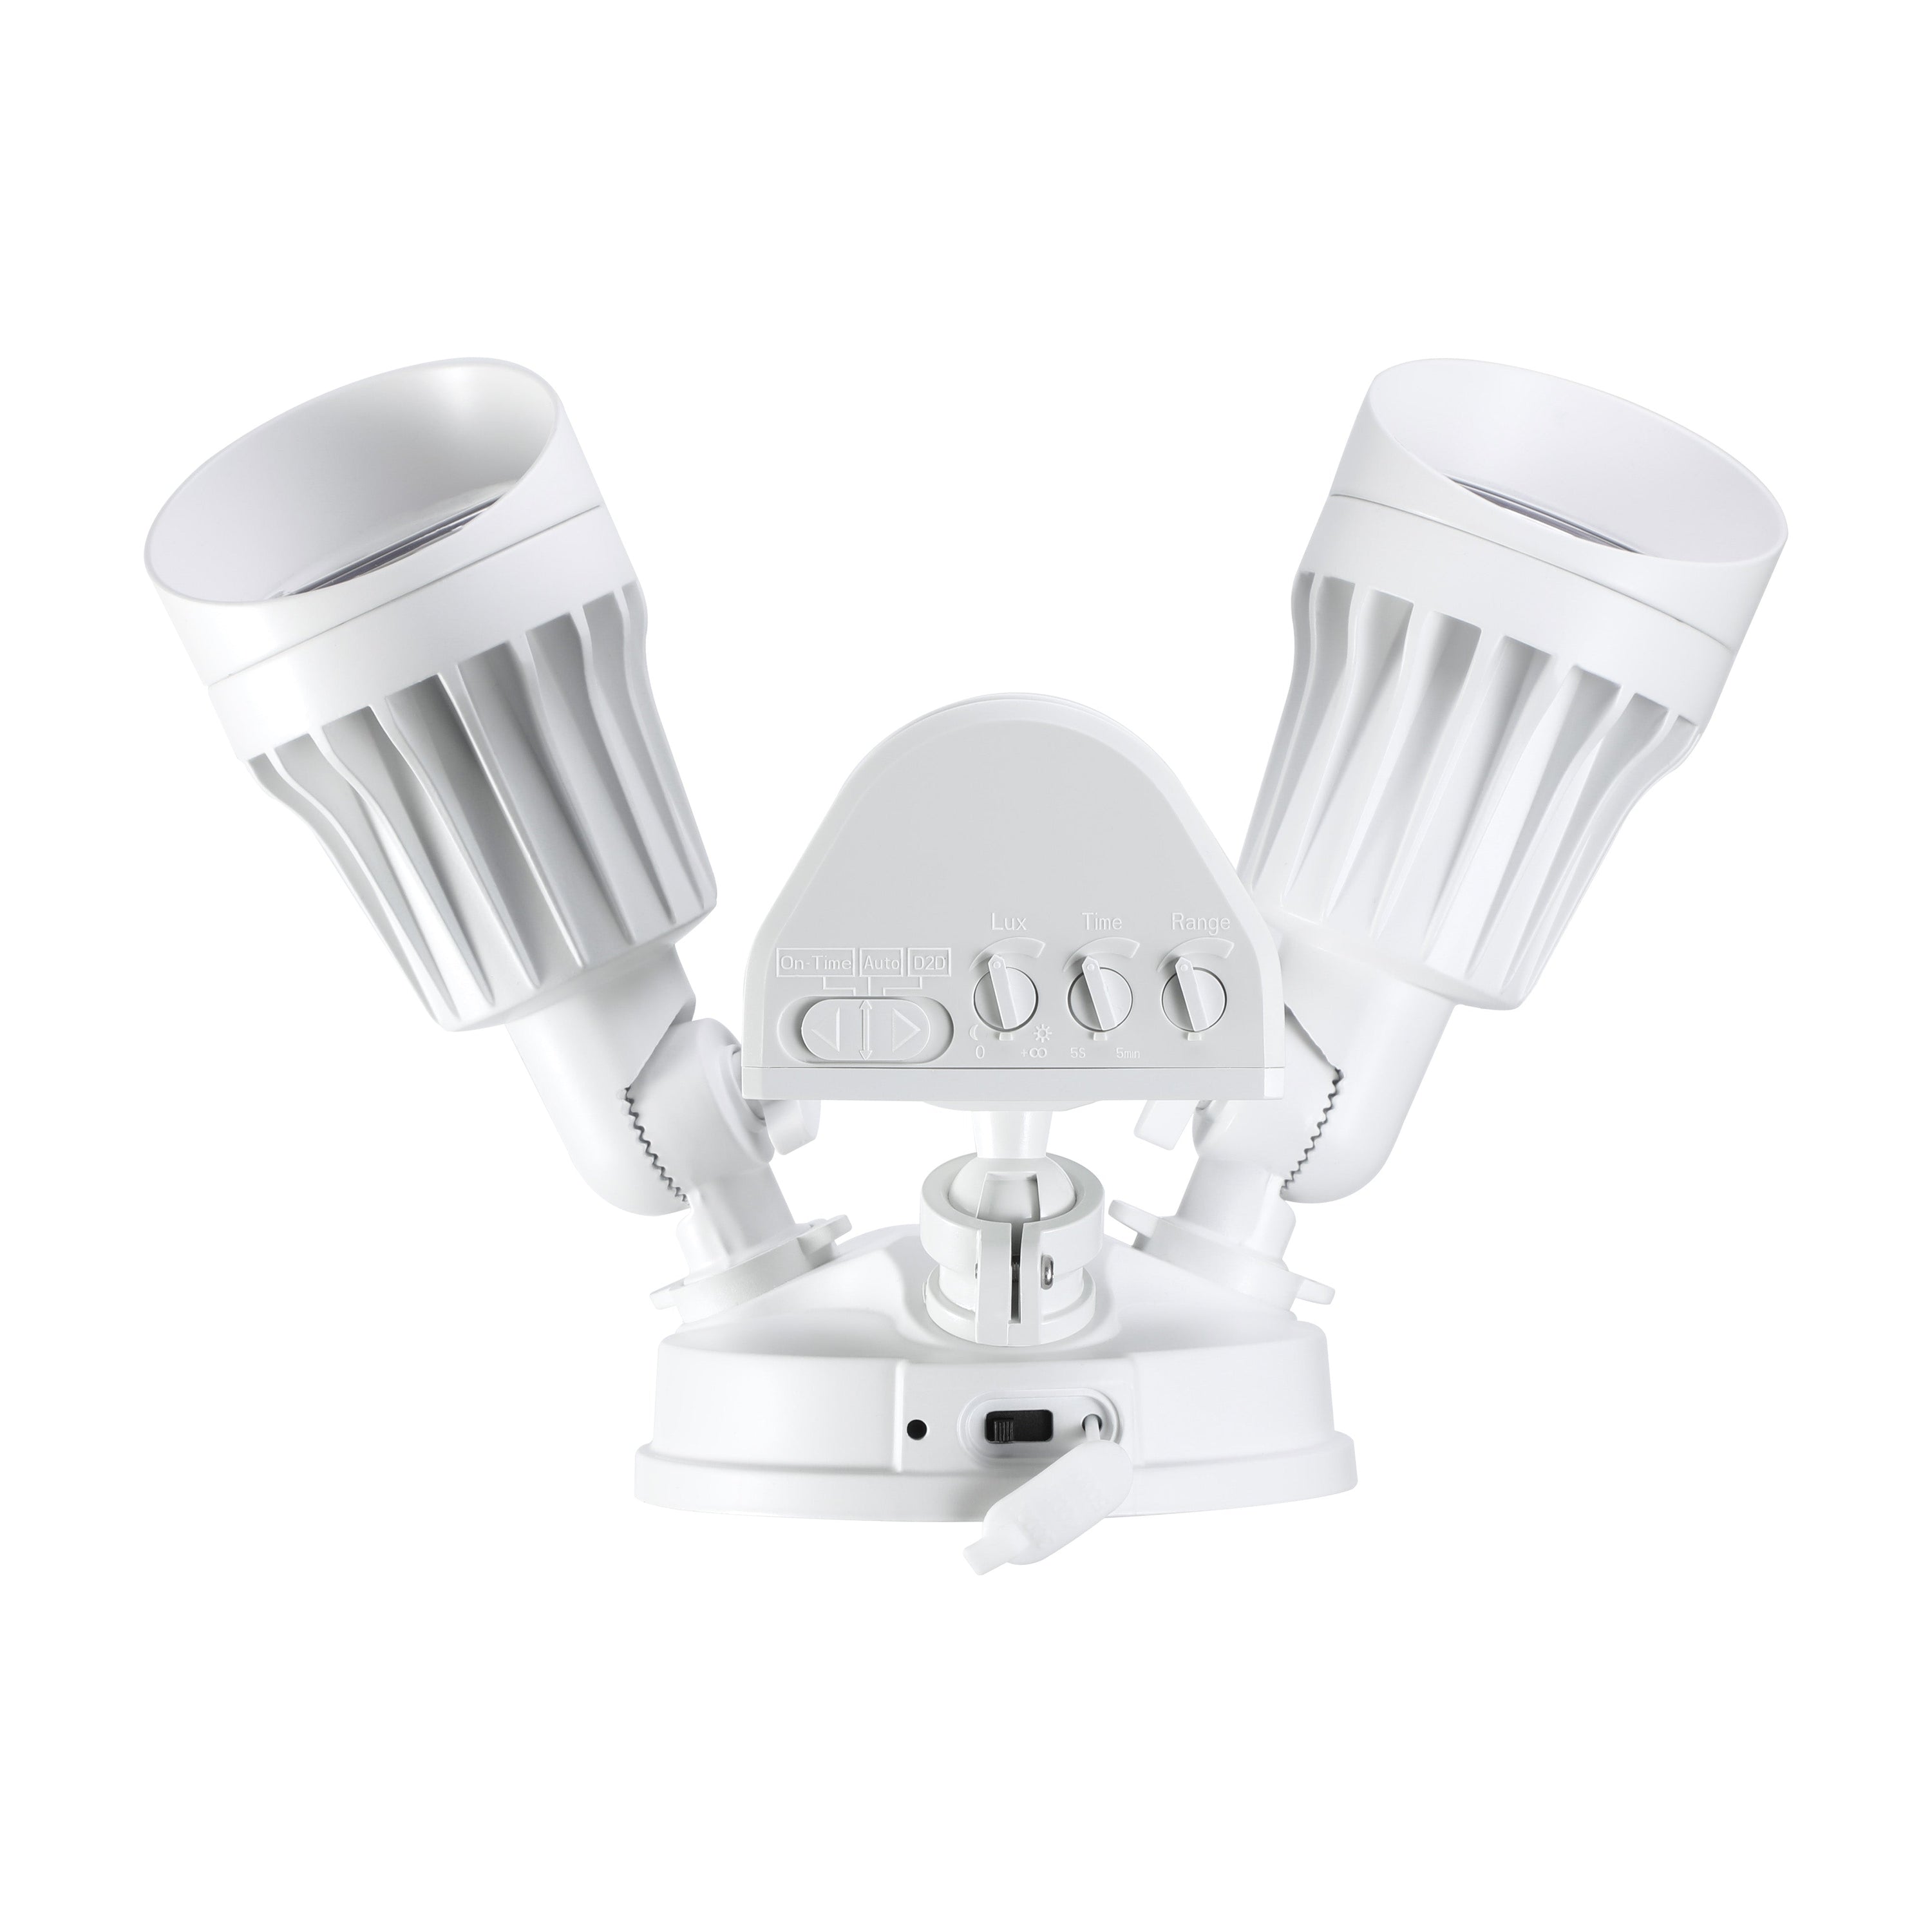 Watchman+ Dual-Heads 25W LED Security Light - White - Adjustable CCT